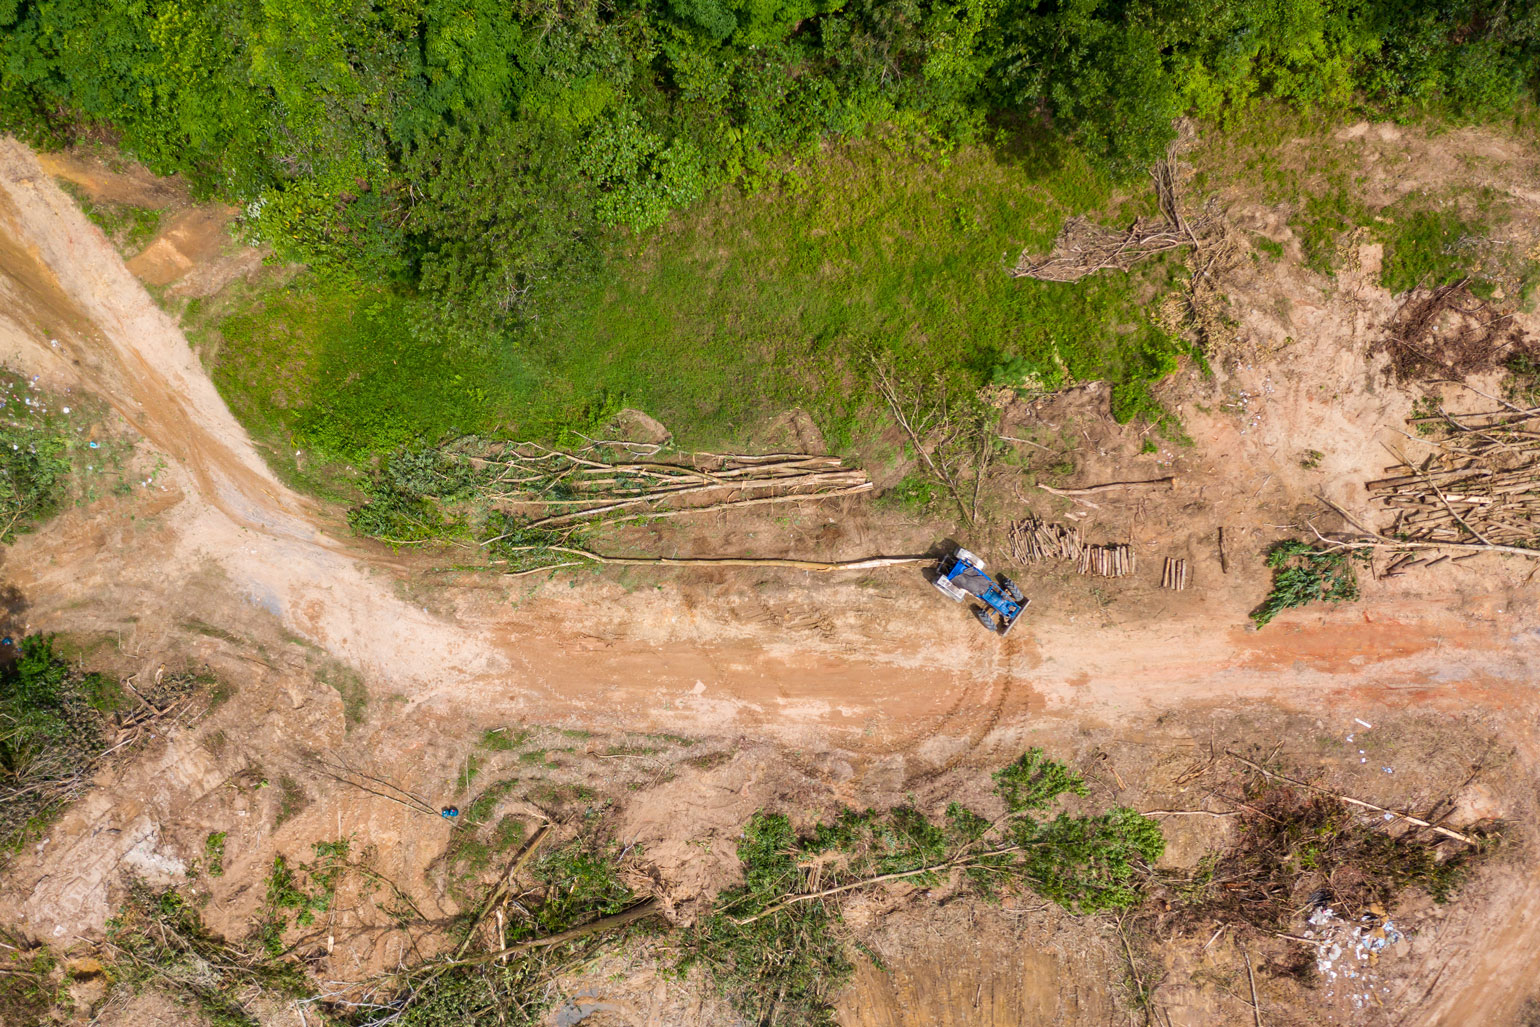 Agriculture, biodiversity loss and climate change - aerial shot of a tractor on a swath of deforested ground.